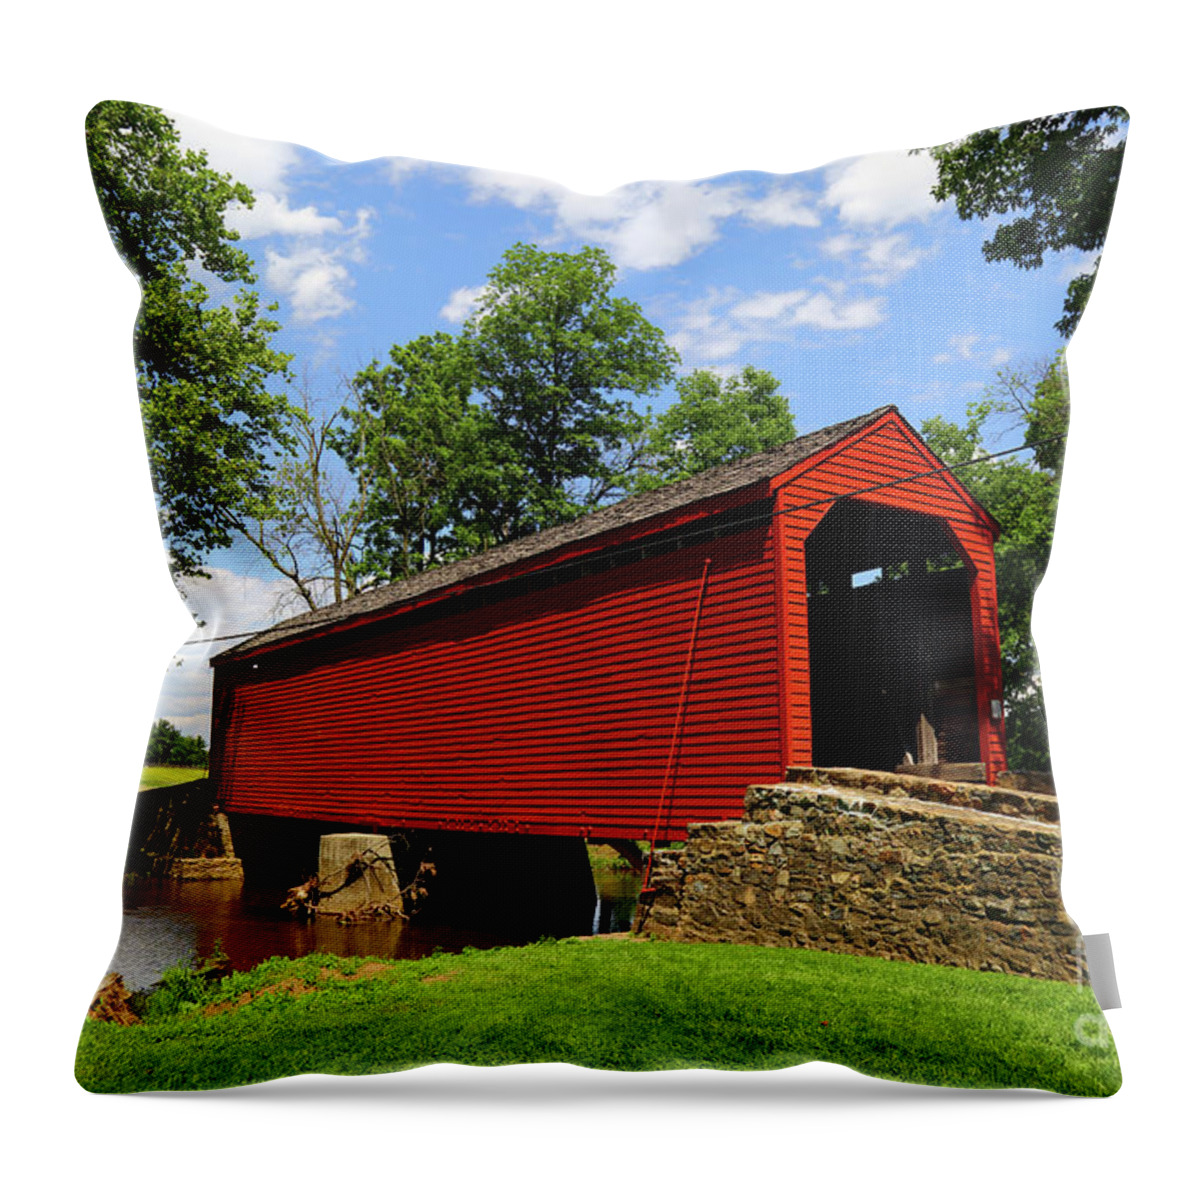 Covered Bridge Throw Pillow featuring the photograph Loys Station Covered Bridge Frederick County Maryland by James Brunker